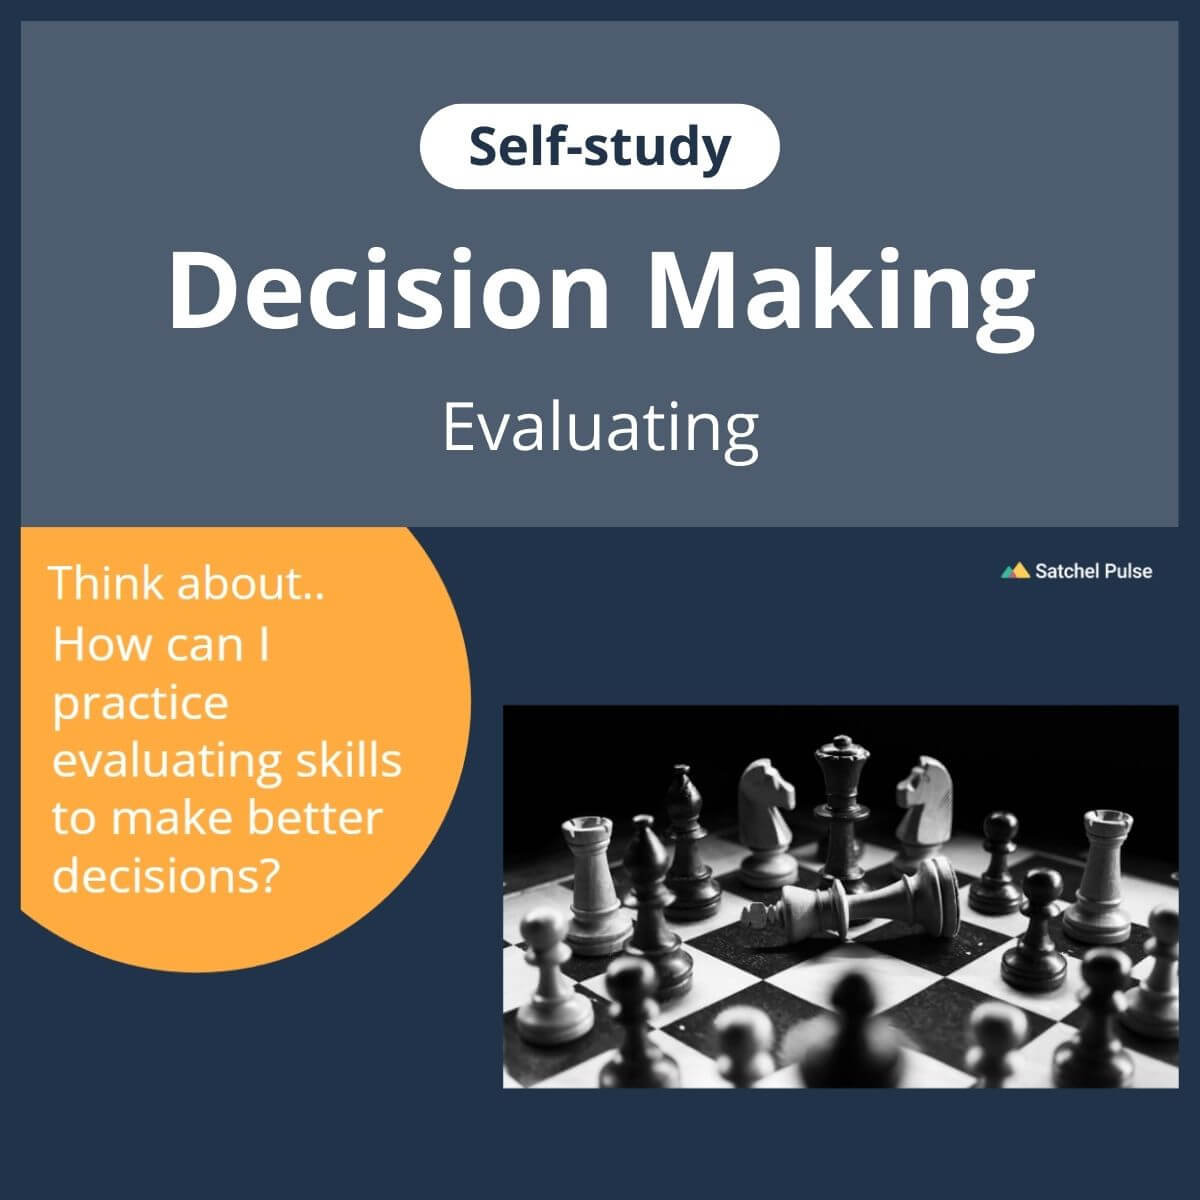 SEL self-study focusing on Evaluating to use in your classroom as one of your SEL activities for Responsible Decision-Making